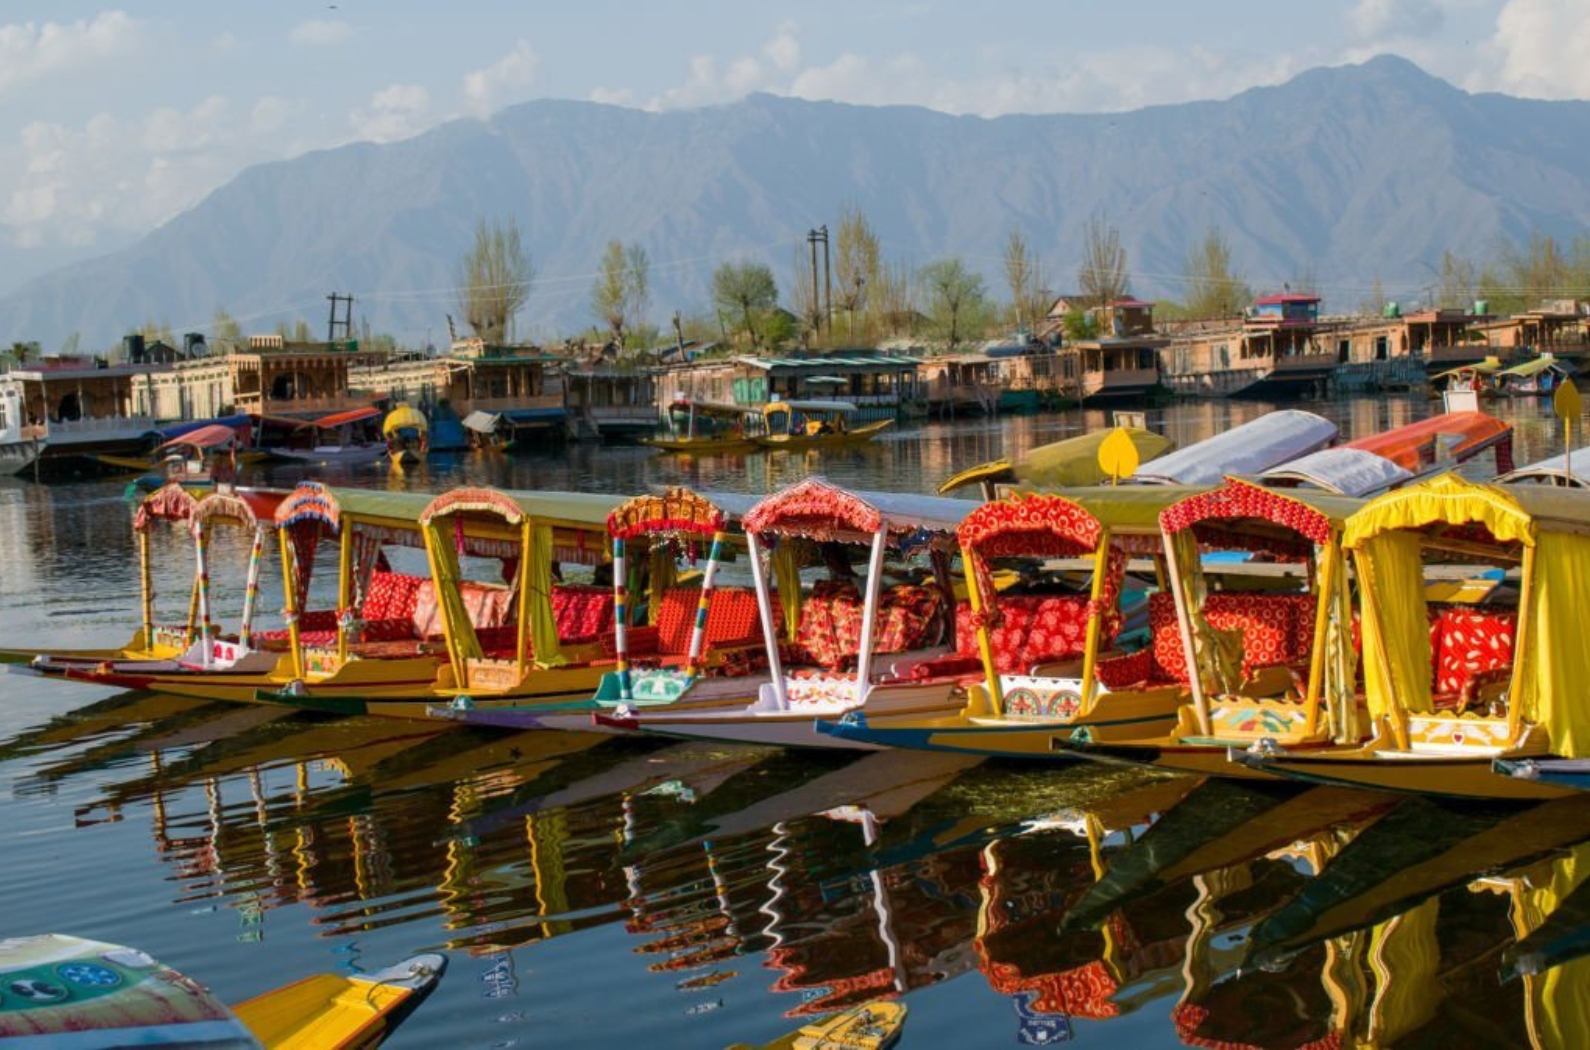 Nicely decorated Sikara - Boat at Dal lake Srinagar - Kashmir in which tourist are enjoying the rides.